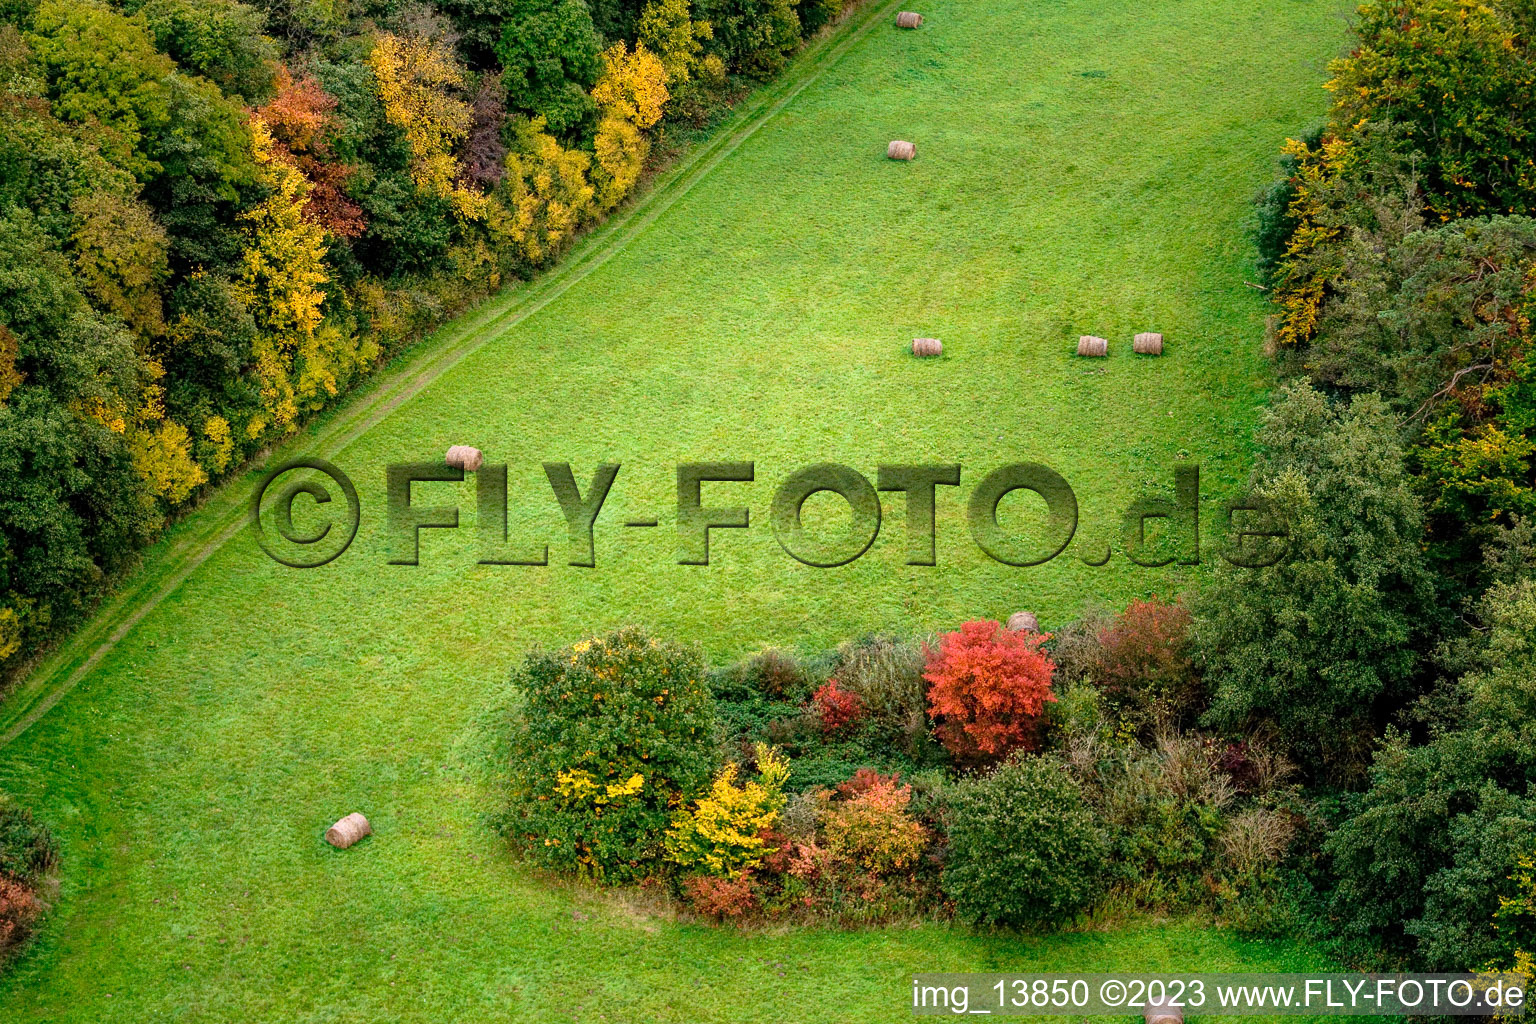 Otterbachtal in Minfeld in the state Rhineland-Palatinate, Germany seen from above